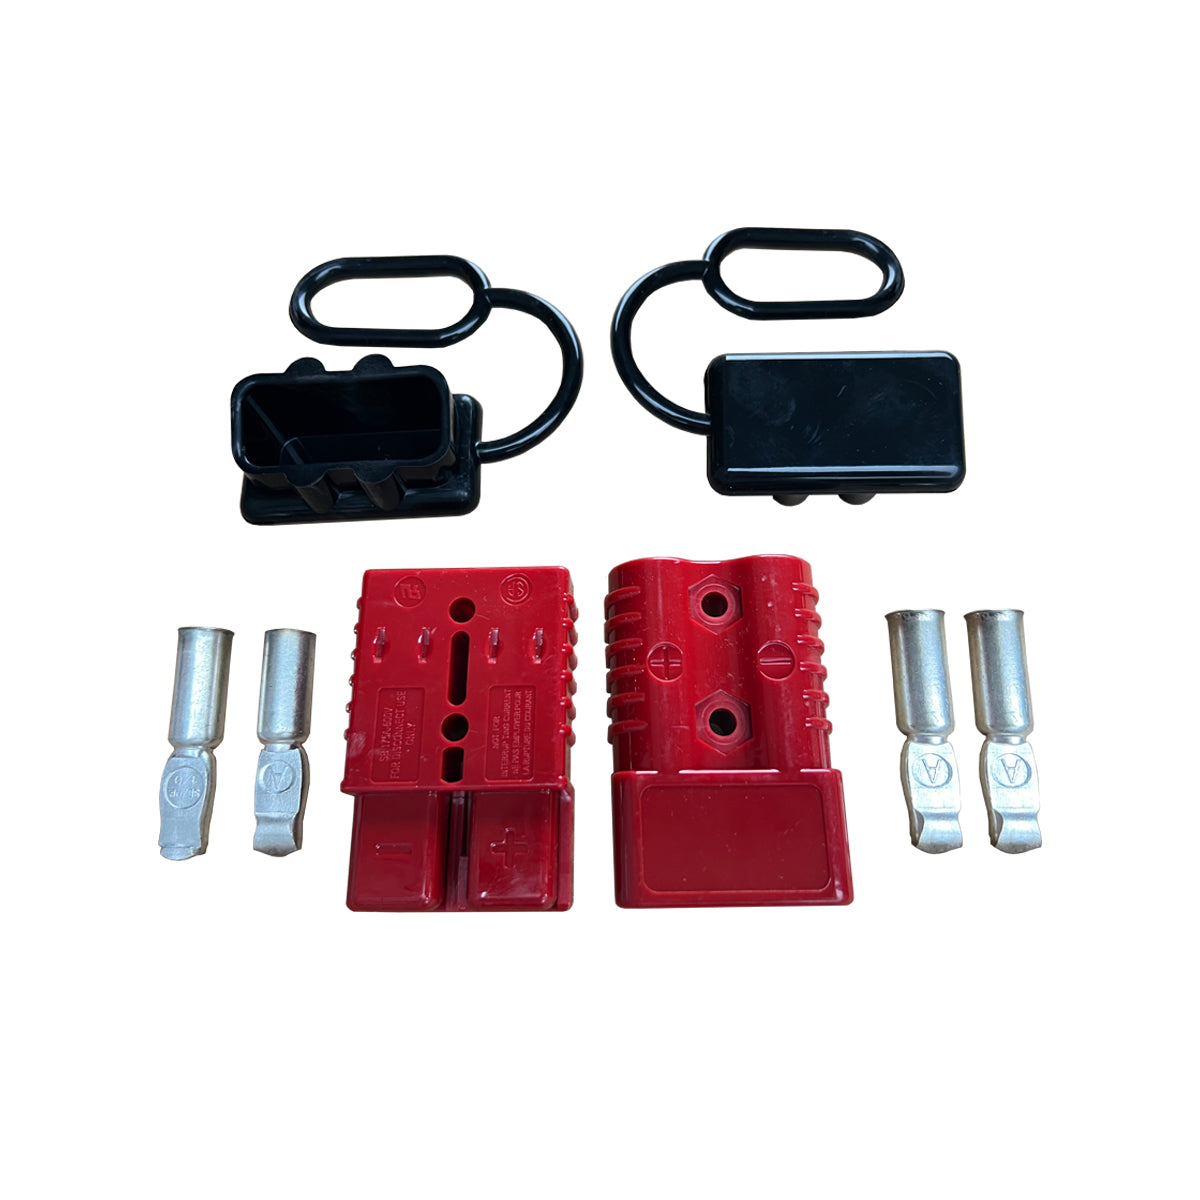 Electrical Accessories for Industrial Winches